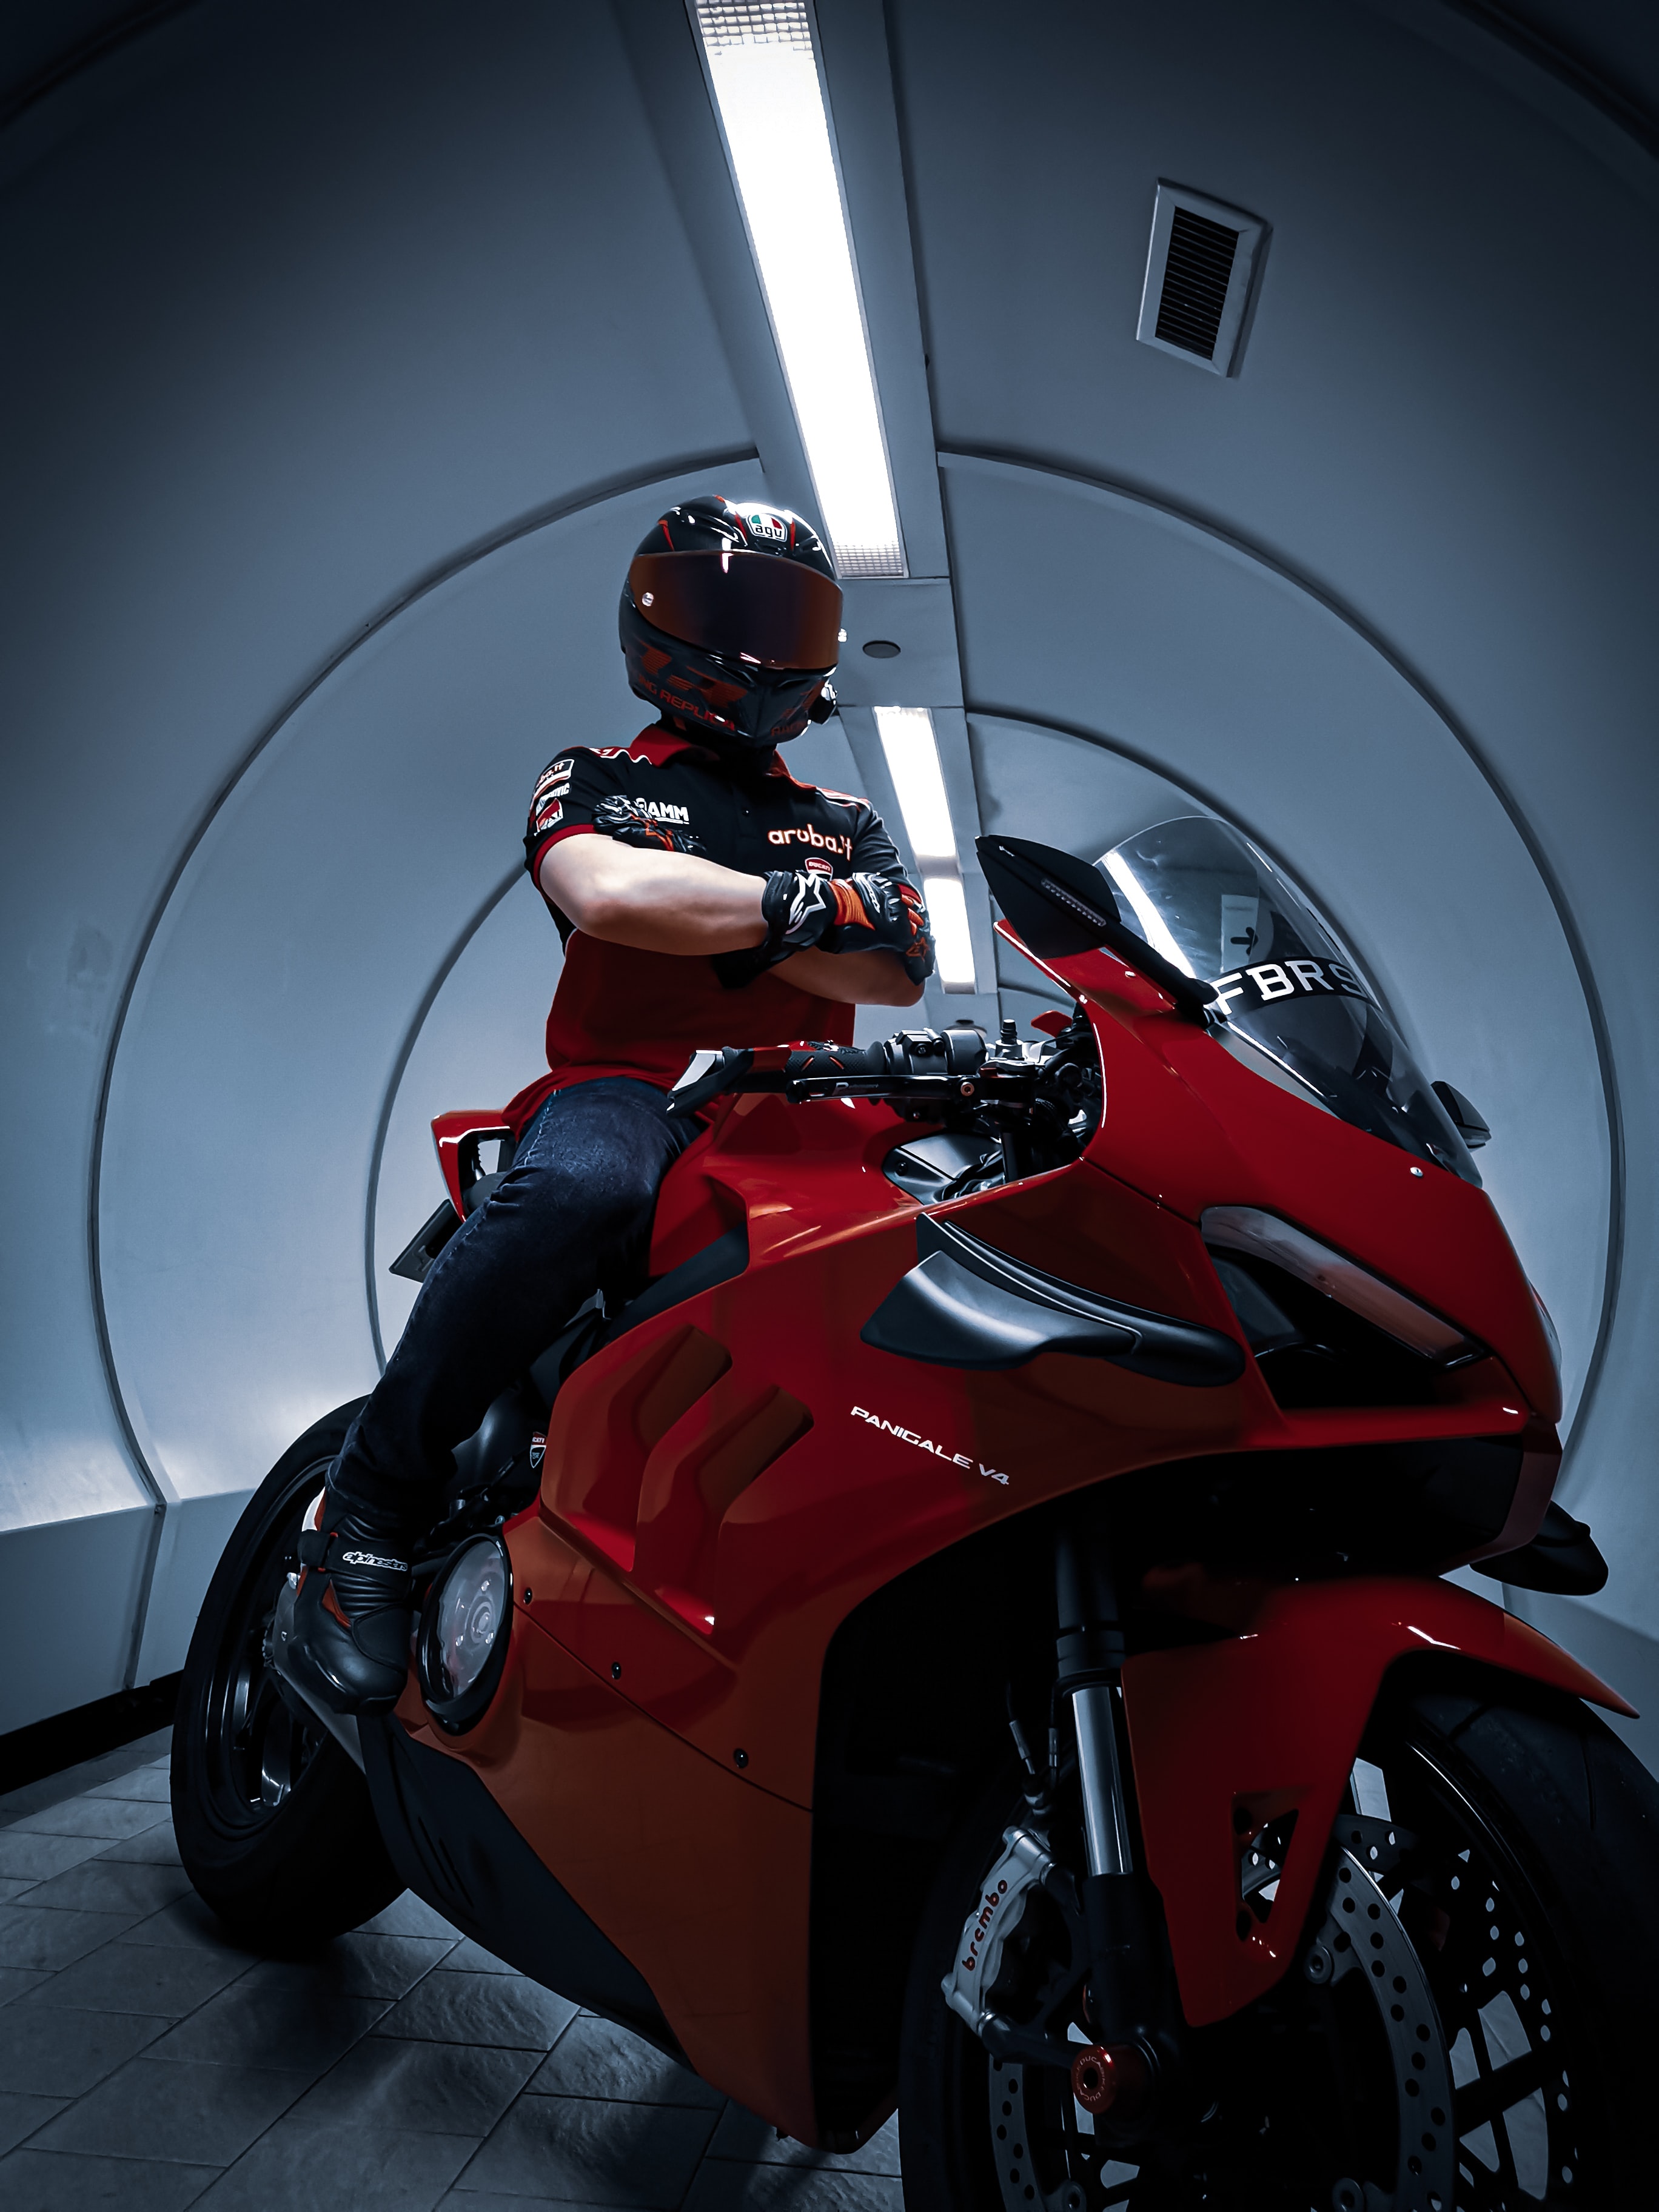 Mobile wallpaper: Tunnel, Motorcycles, Motorcycle, Ducati, Helmet, Bike,  Motorcyclist, 118982 download the picture for free.